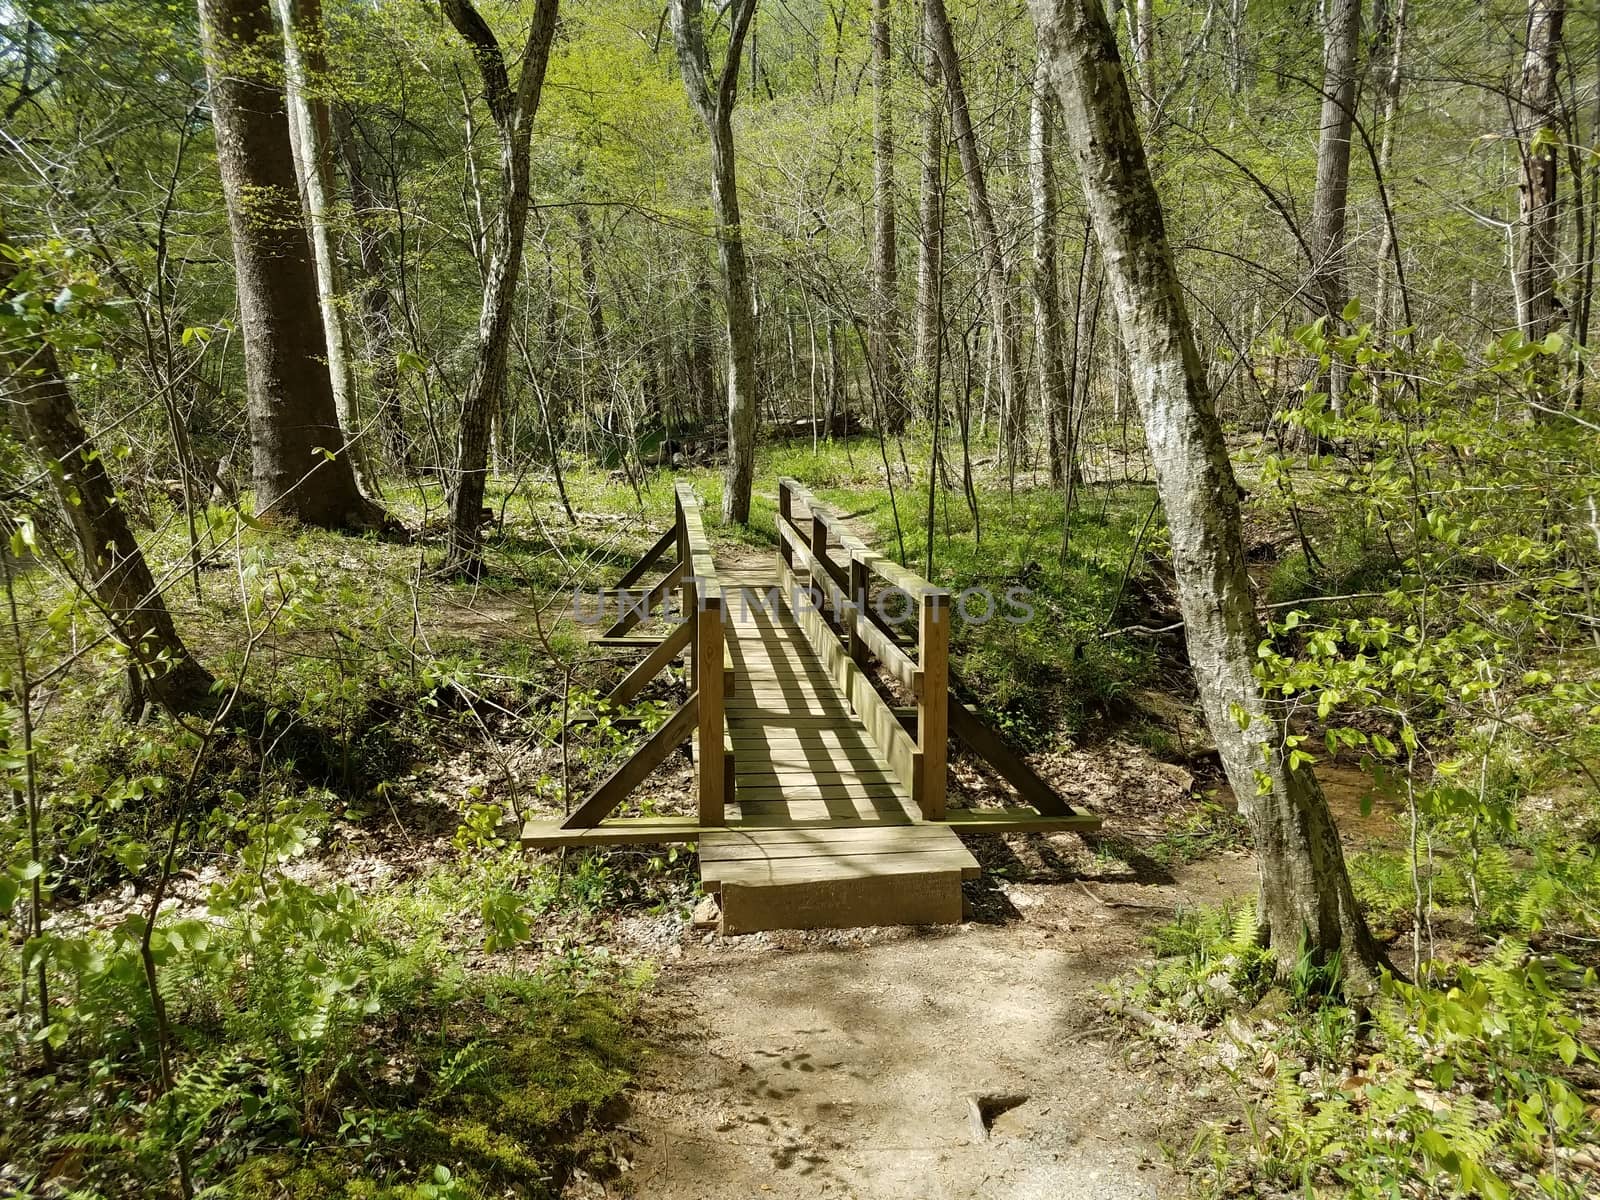 wood bridge over creek on trail in forest with trees by stockphotofan1